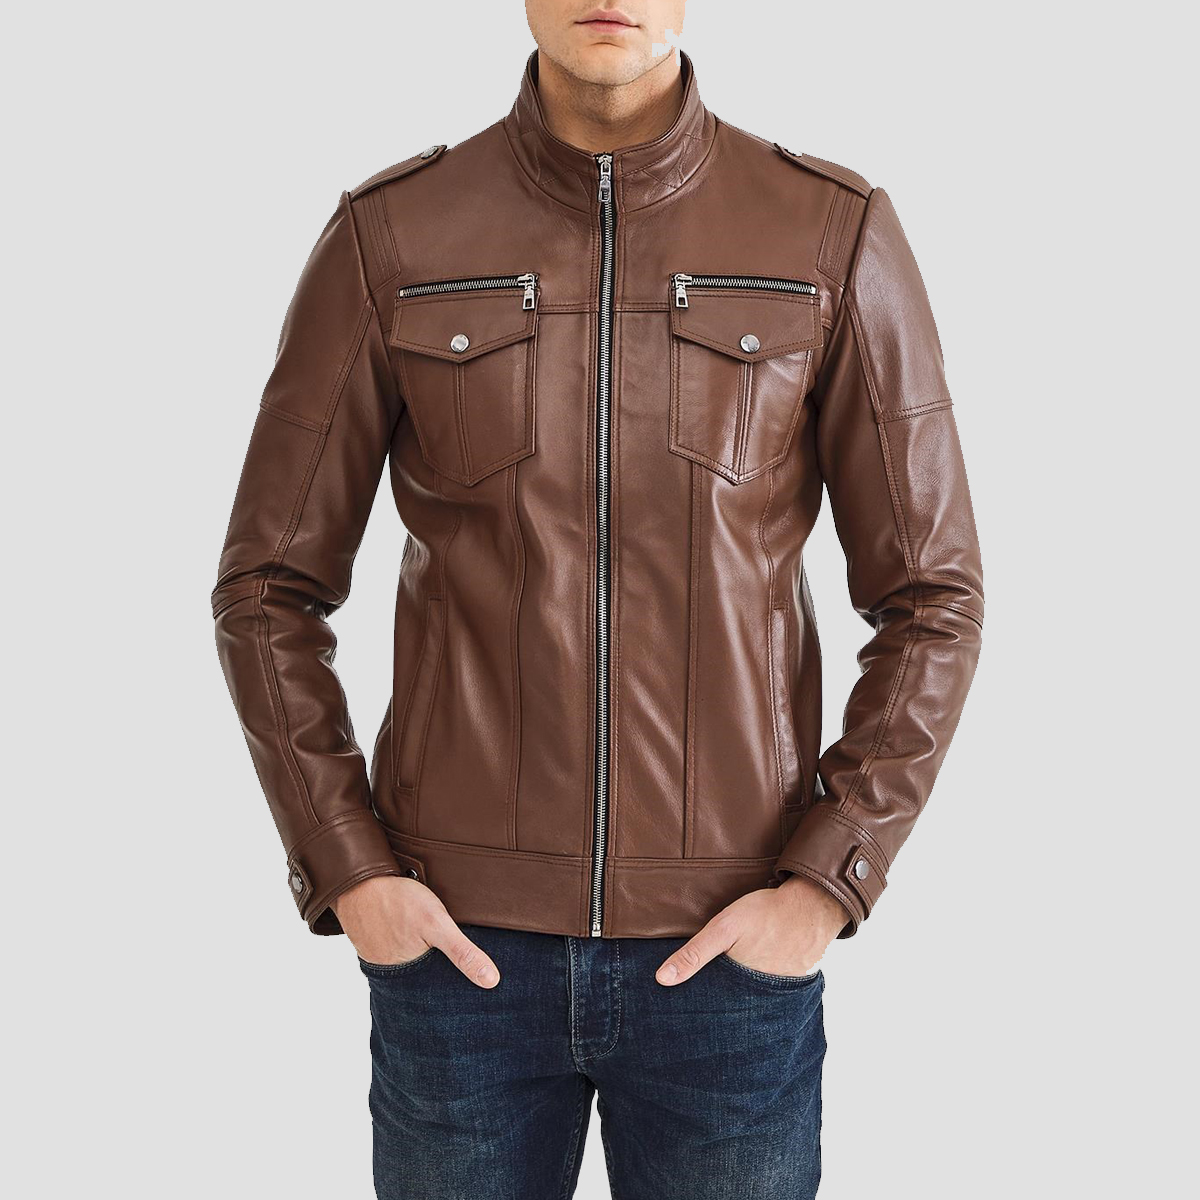 Casual Brown Leather Motorcycle Jacket - The Vintage Leather